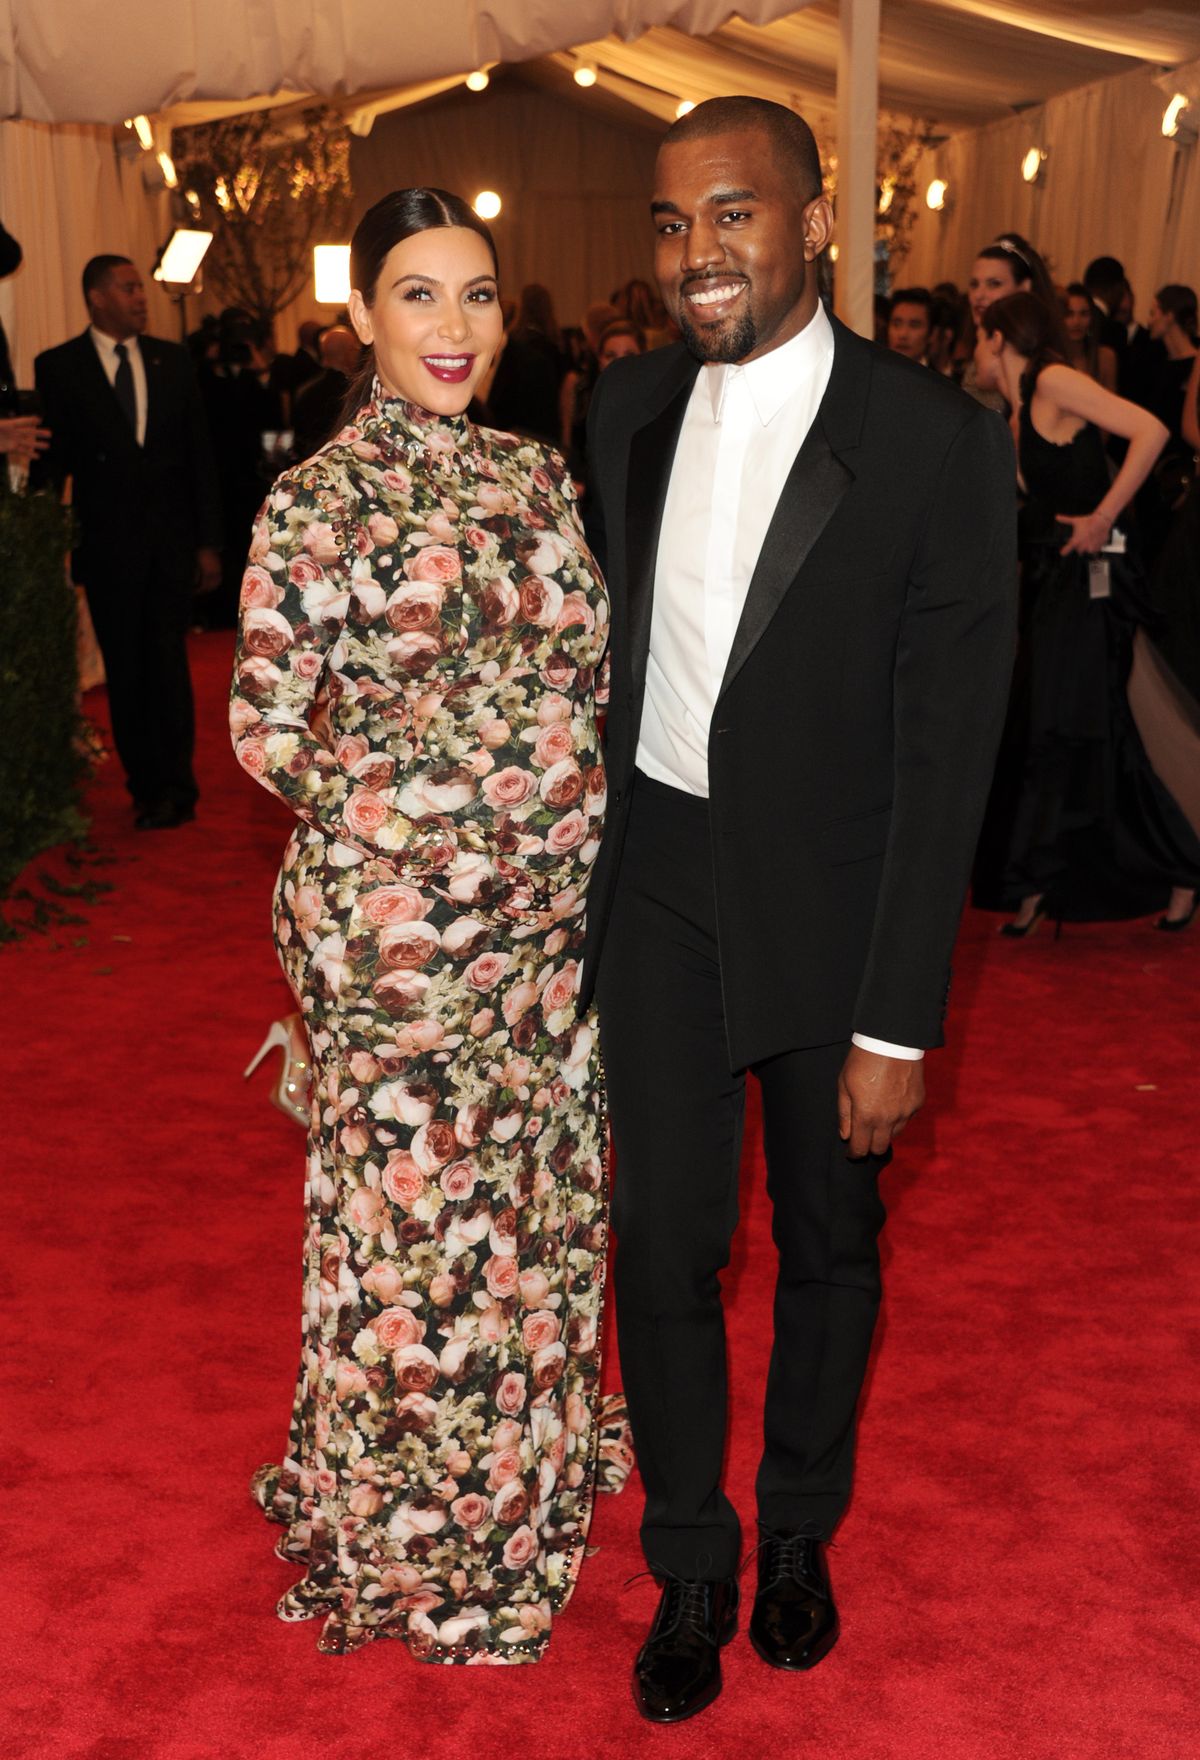 FILE - In this May 6, 2013 file photo, Kim Kardashian and Kanye West attend The Metropolitan Museum of Art